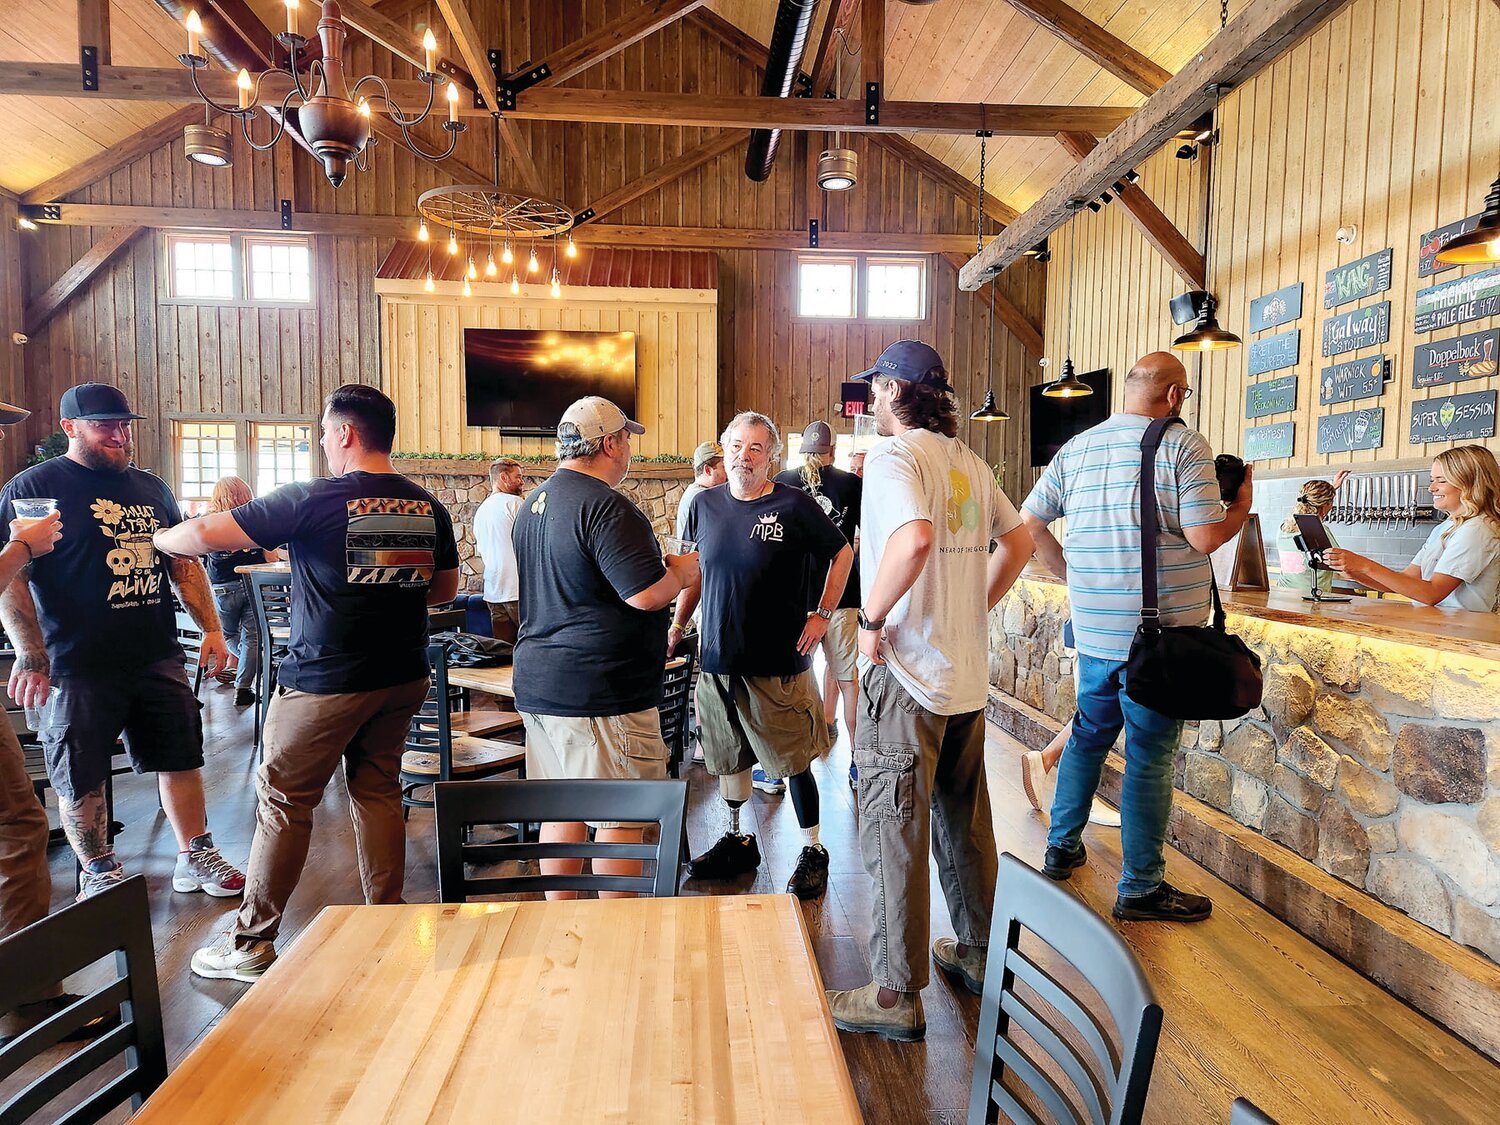 Brewmasters from throughout Bucks County came together at Warwick Farm Brewing to create “Expedition Bucks County” ale.